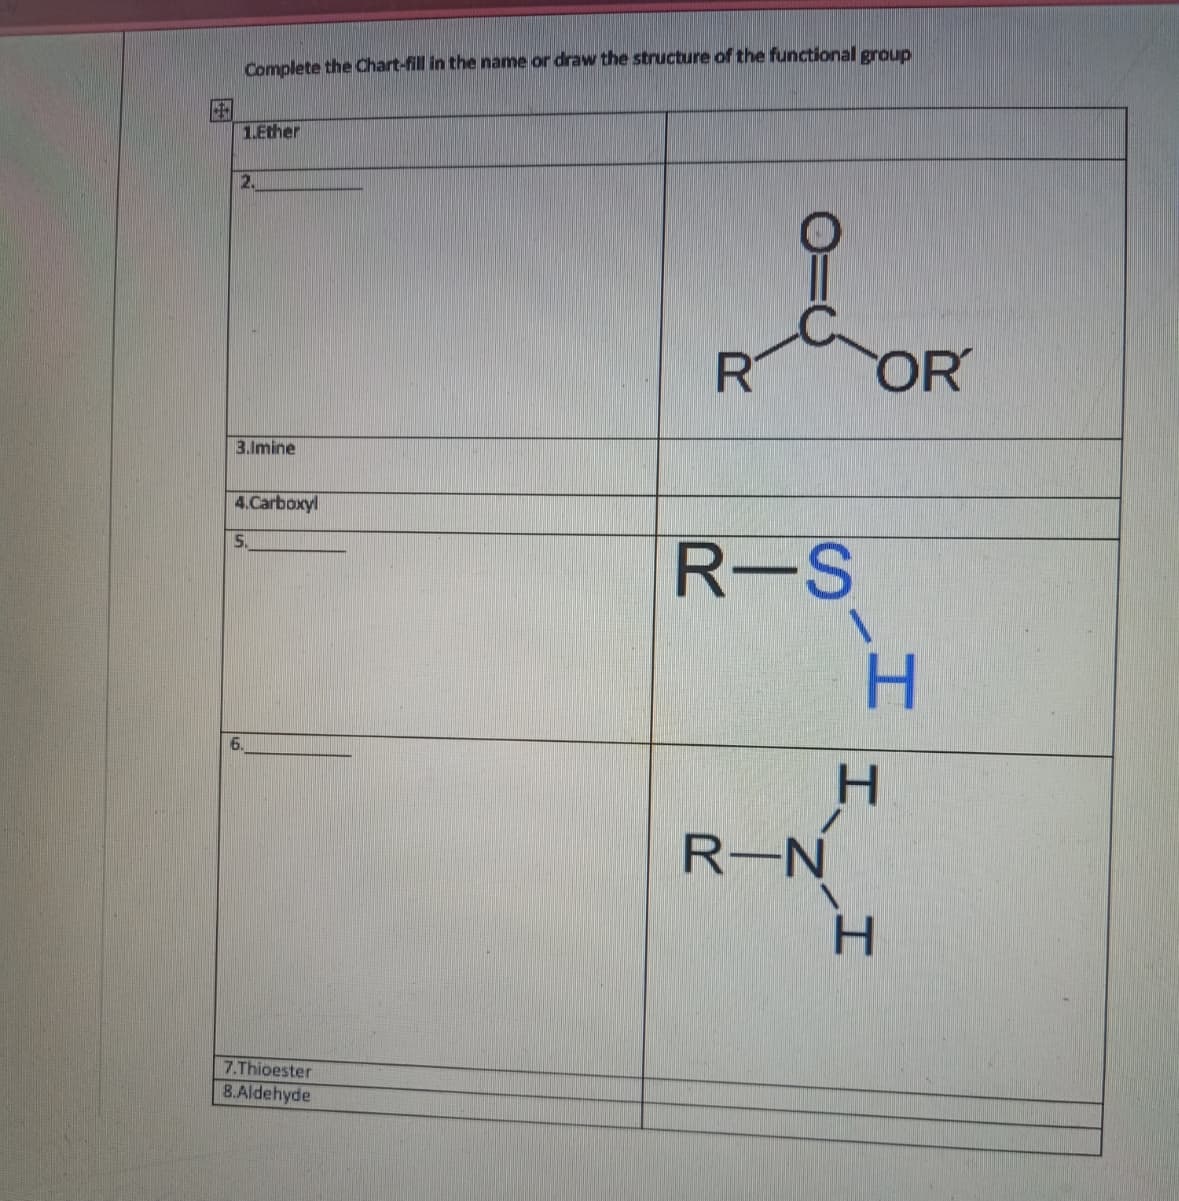 +++
Complete the Chart-fill in the name or draw the structure of the functional group
1.Ether
2.
3.Imine
4.Carboxyl
5.
7.Thioester
8.Aldehyde
R
R-S
R-N
OR
H
H
H